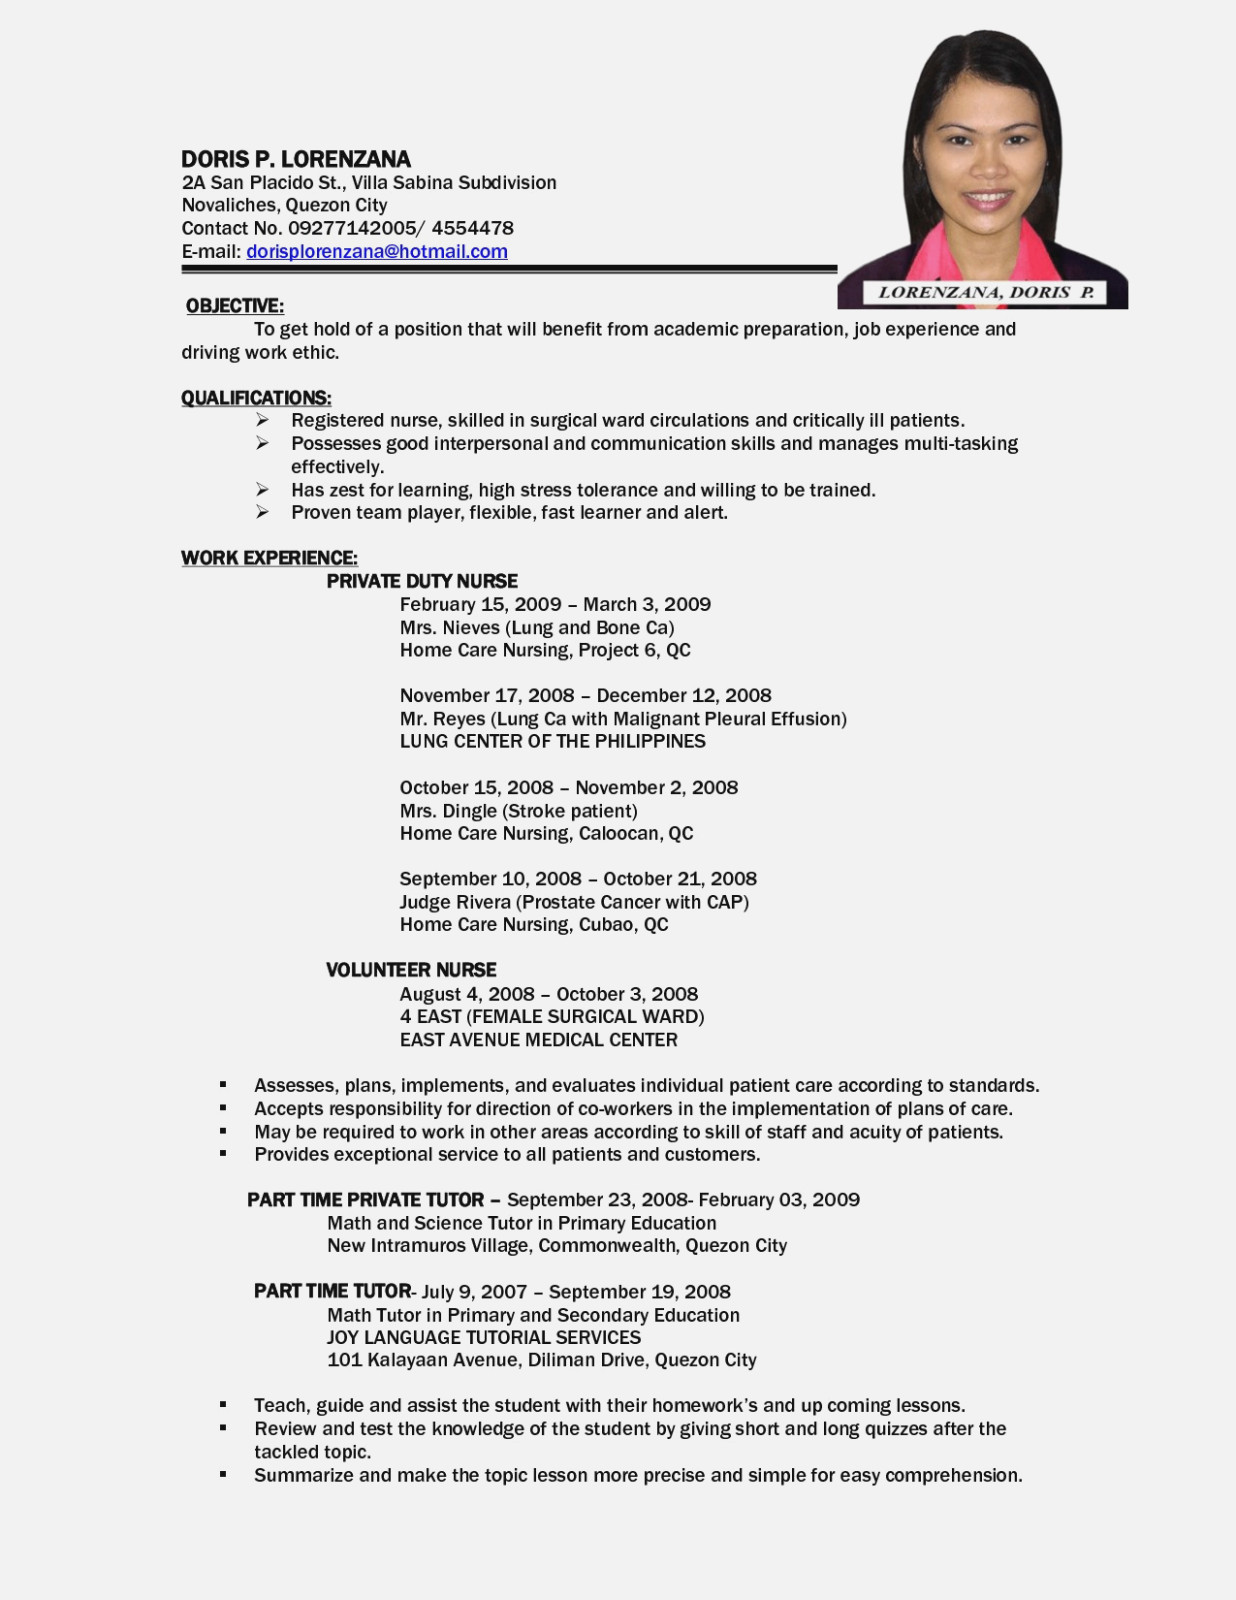 Sample Resume for Elementary Teachers In the Philippines This Story Behind Ideal